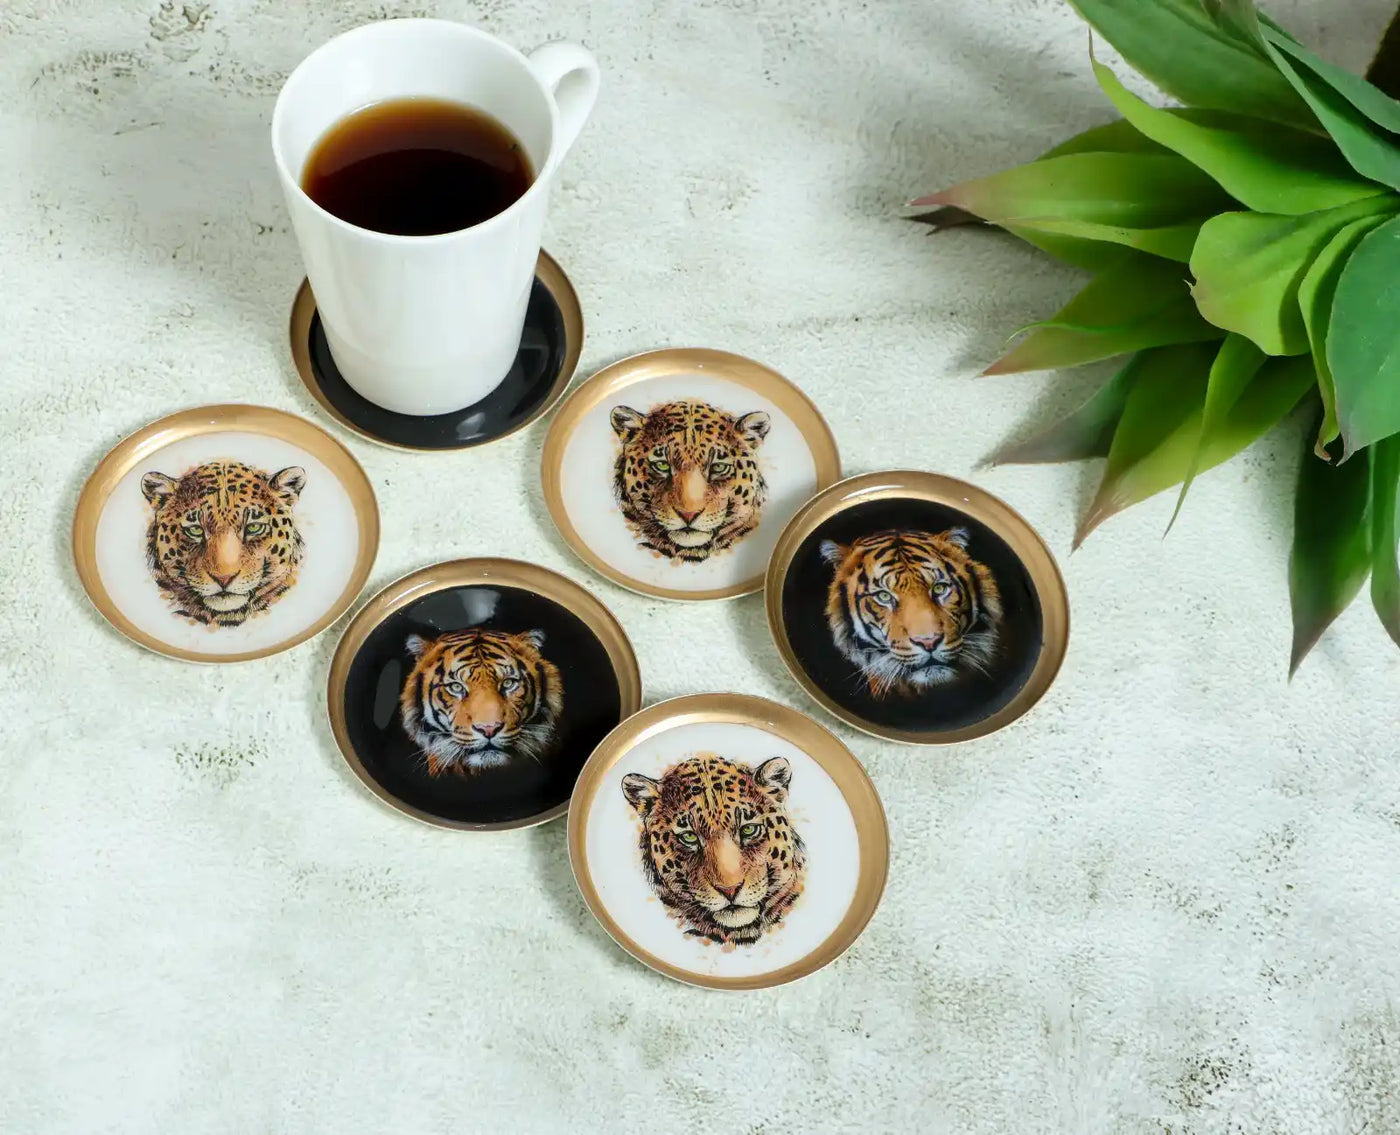 Round Aesthetic Tiger Print Coaster - Set of 6 - Dining & Kitchen - 2